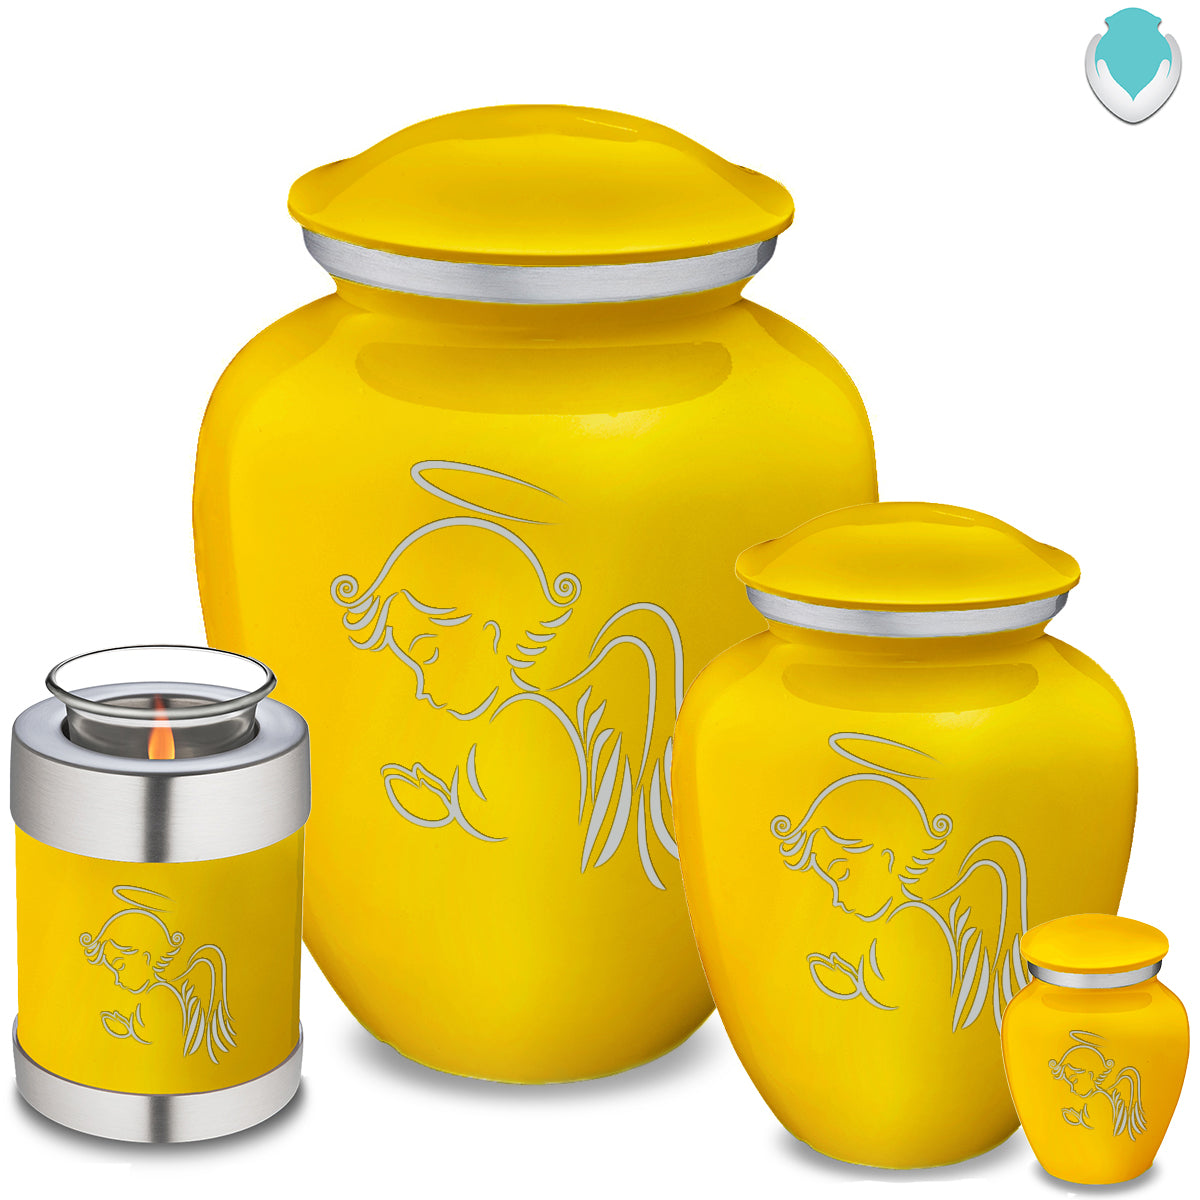 Adult Embrace Yellow Angel Cremation Urn